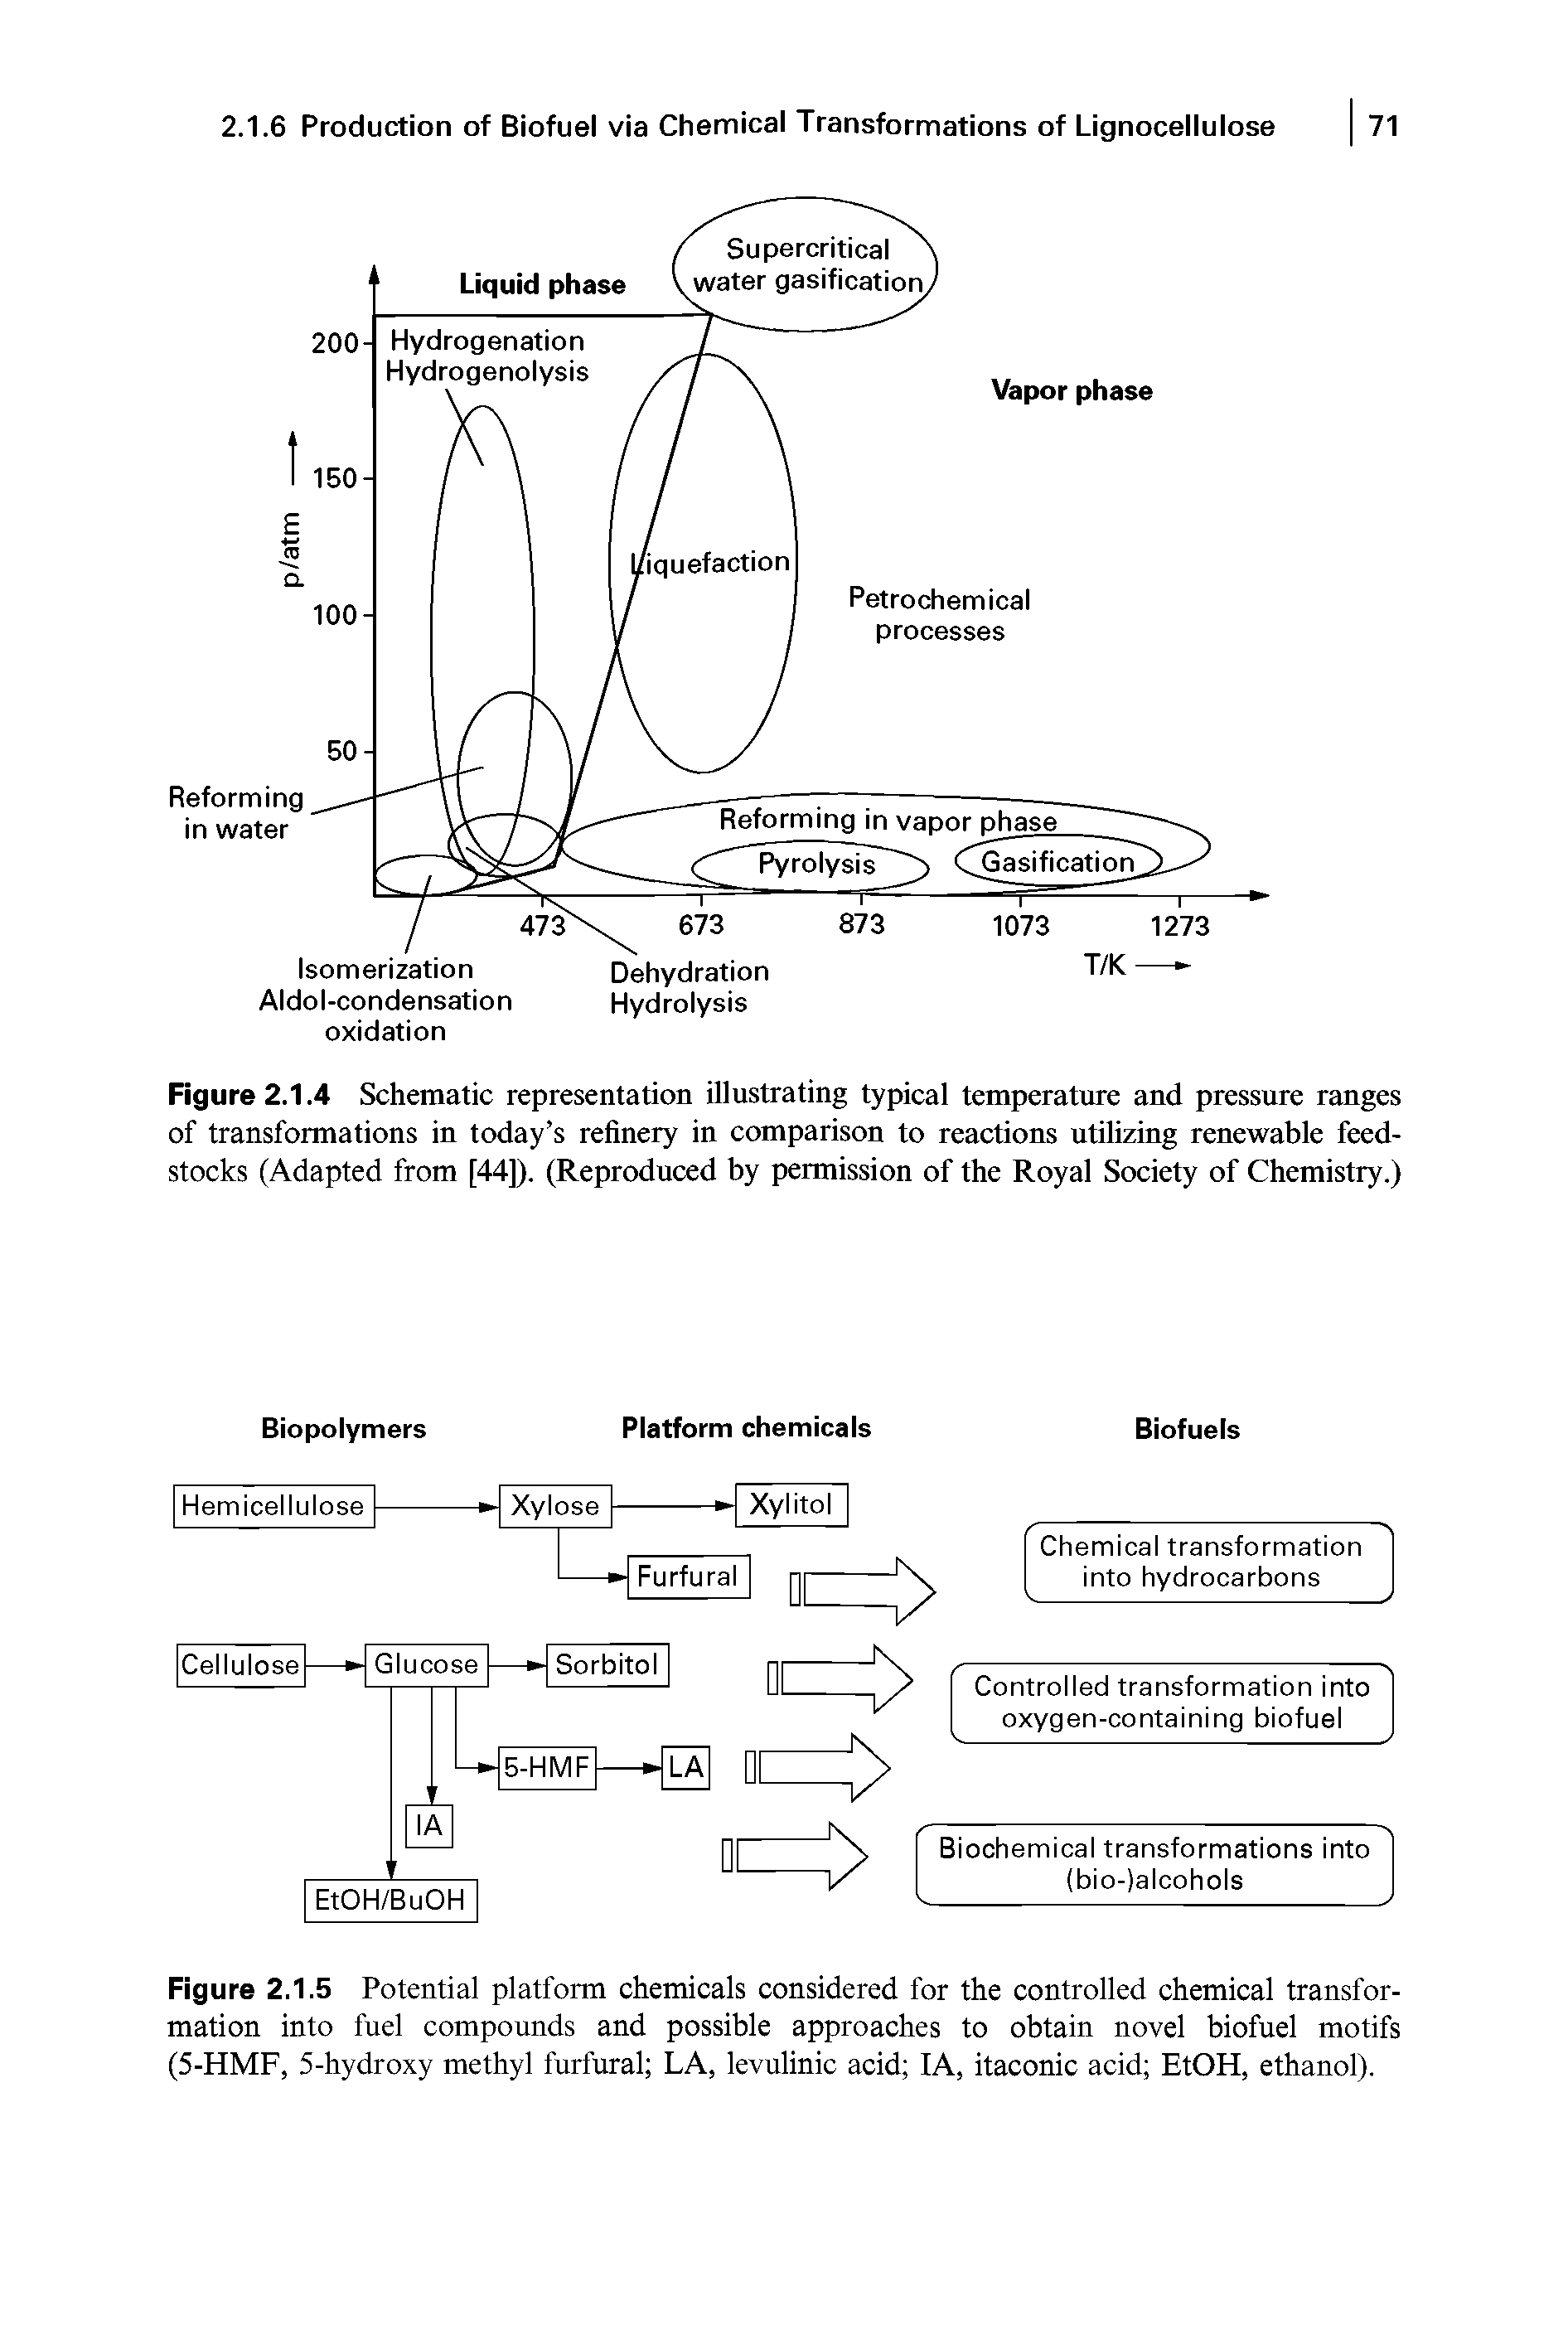 Figure 2.1.4 Schematic representation illustrating typical temperature and pressure ranges of transformations in today s refinery in comparison to reactions utilizing renewable feedstocks (Adapted from [44]). (Reproduced by permission of the Royal Society of Chemistry.)...